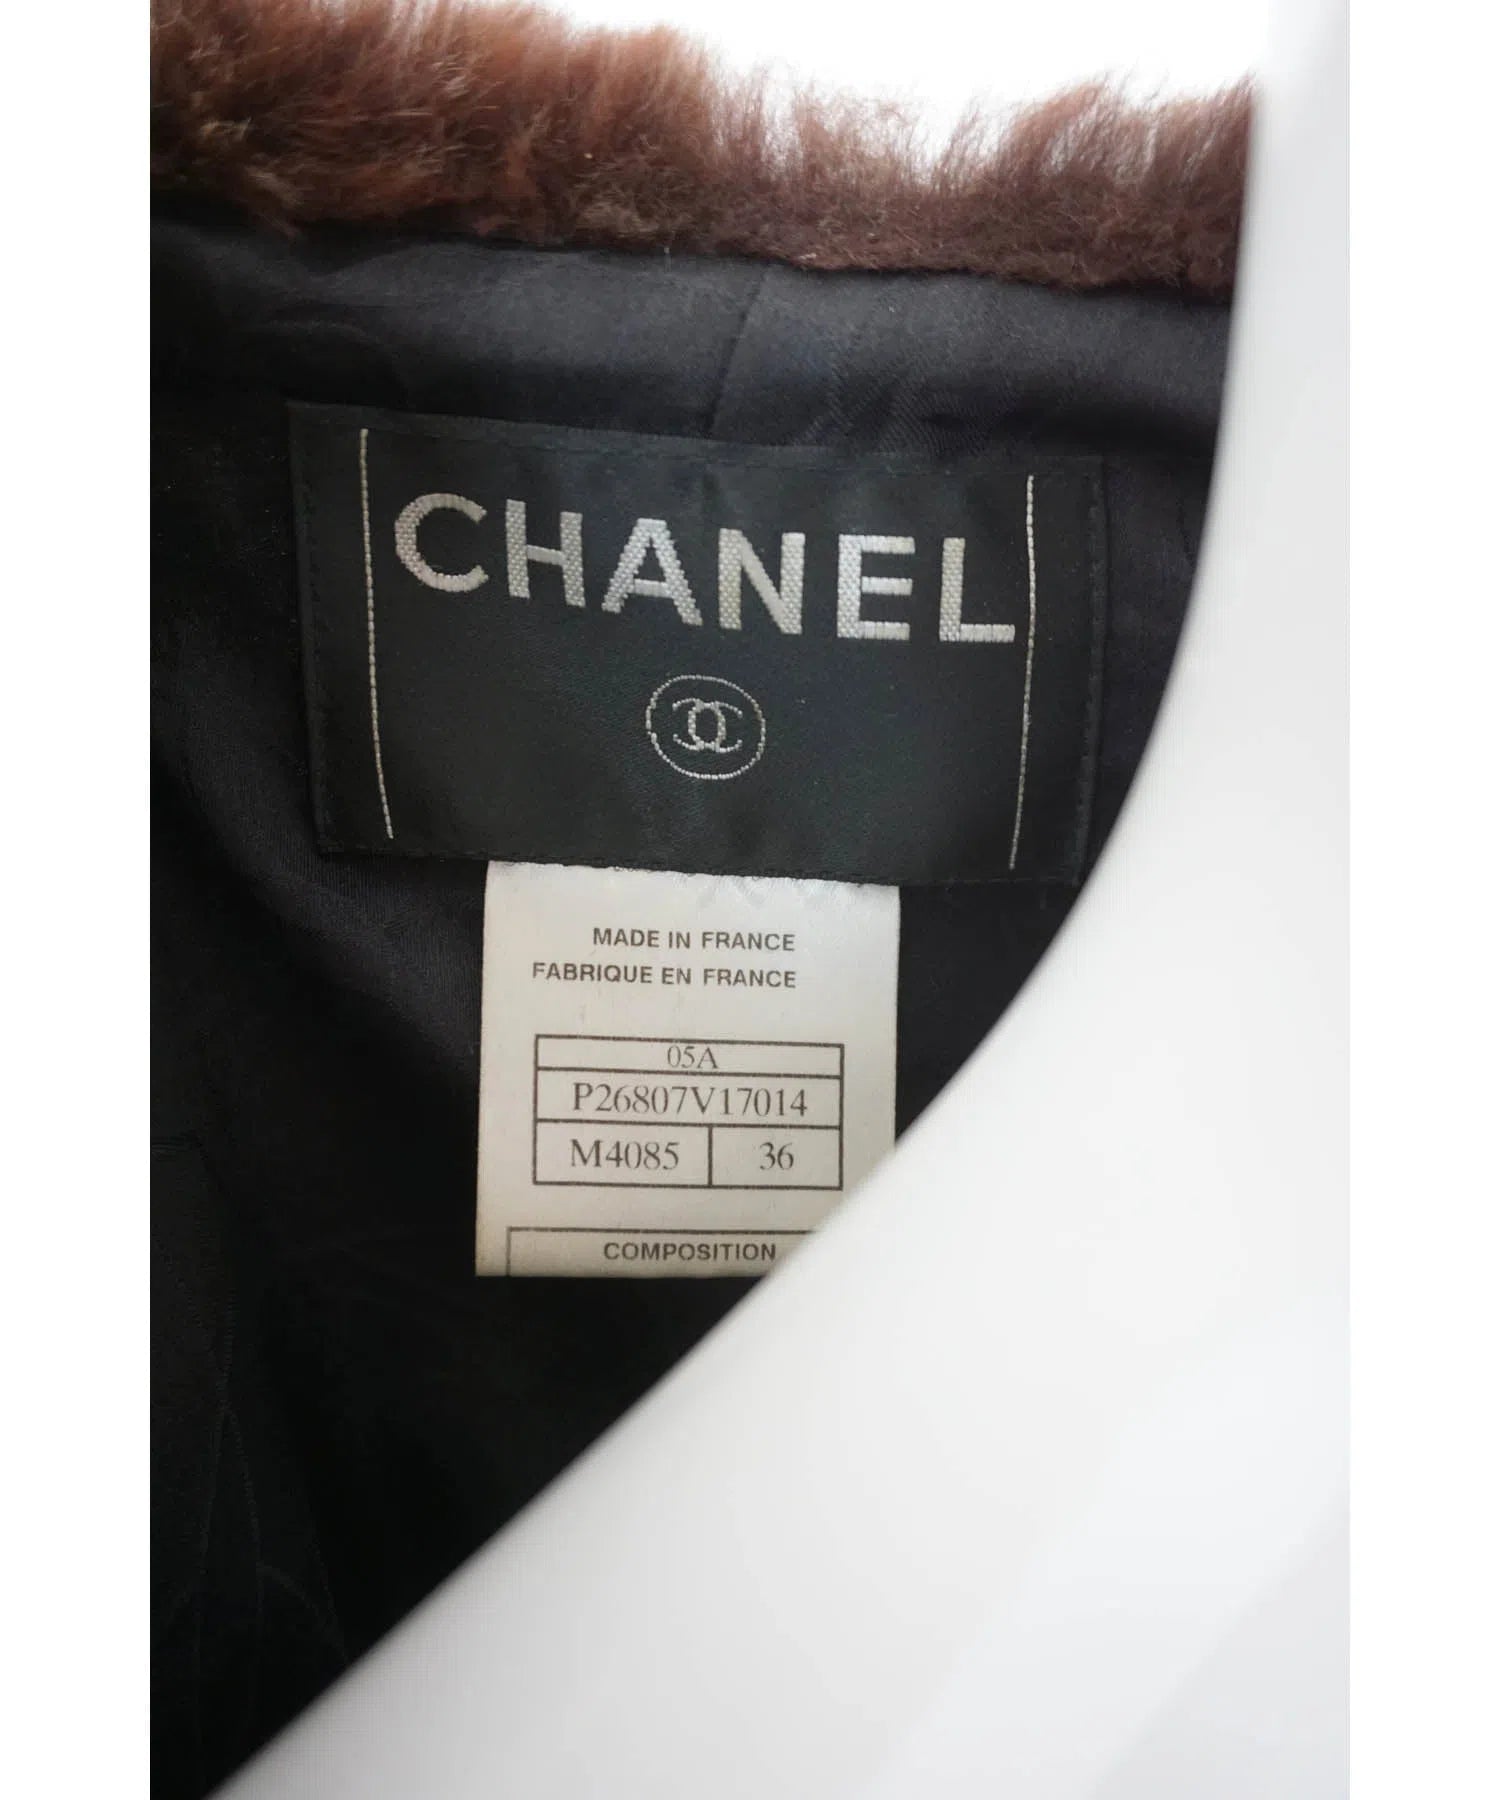 Chanel 2005 Fantasy Tweed Suit Jacket and Skirt